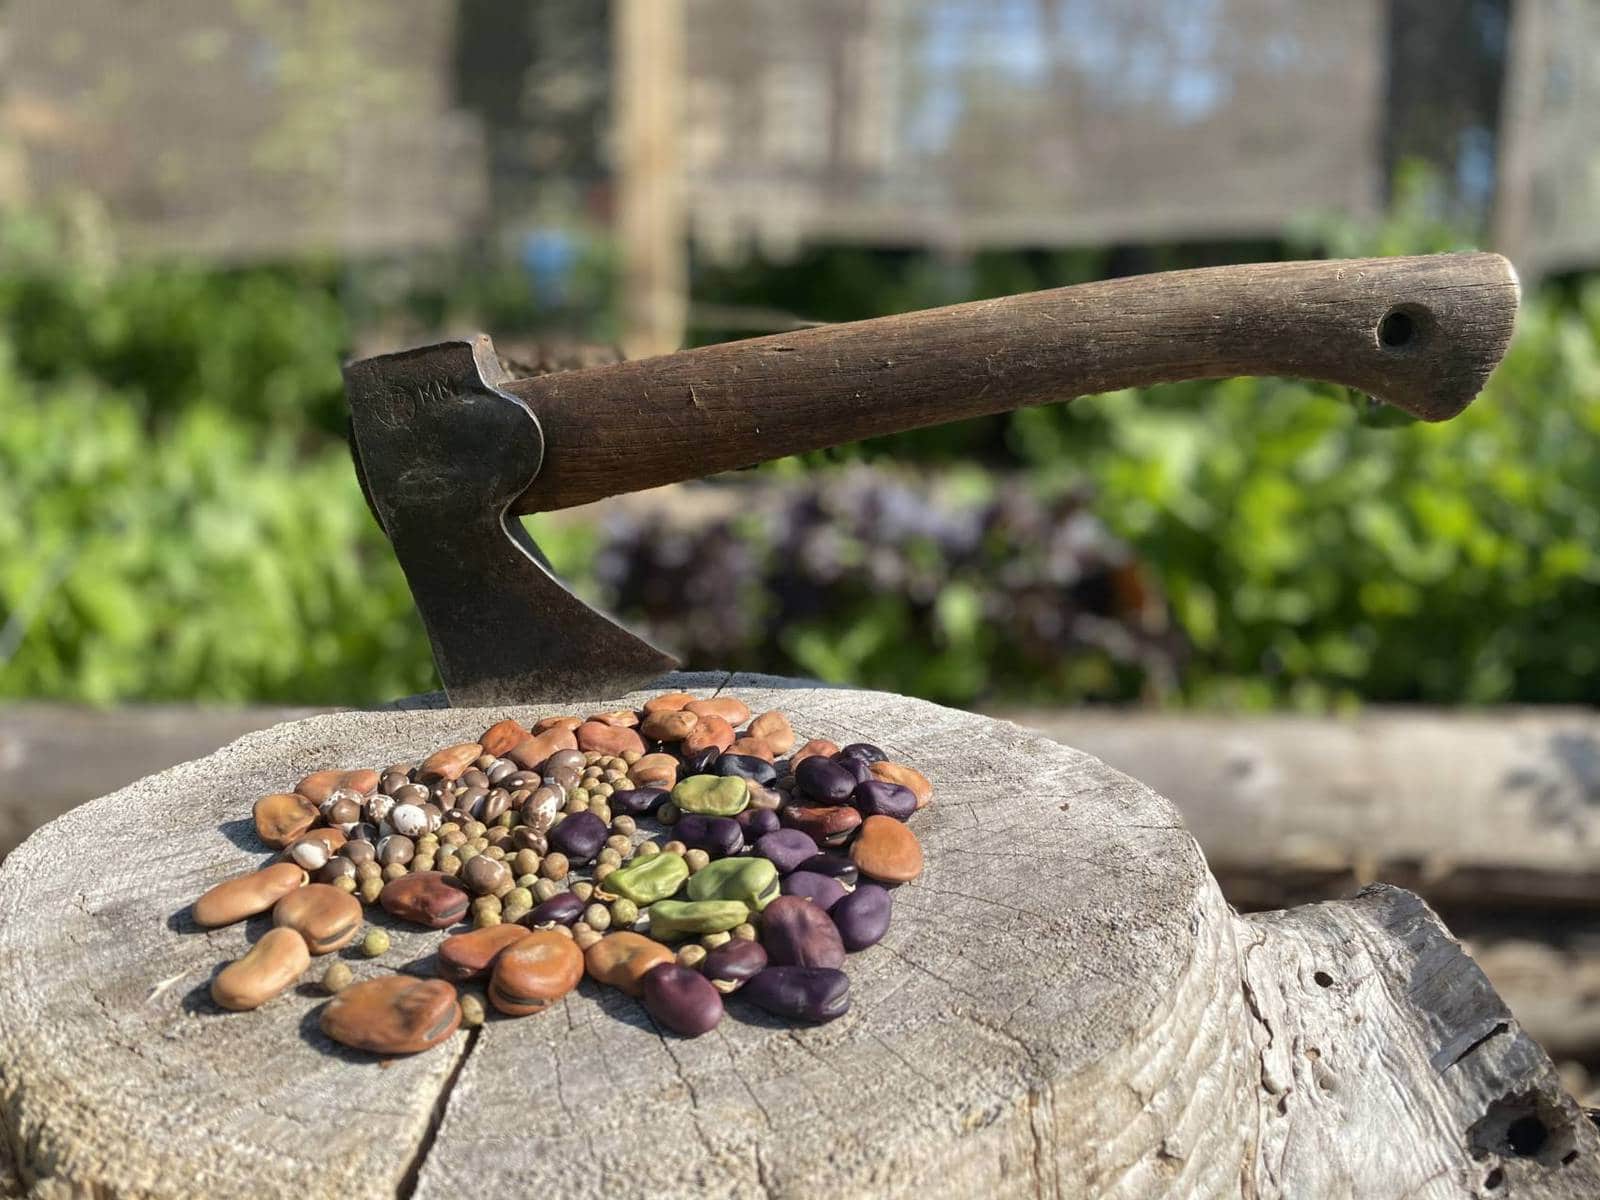 A hatchet and seeds on a stump